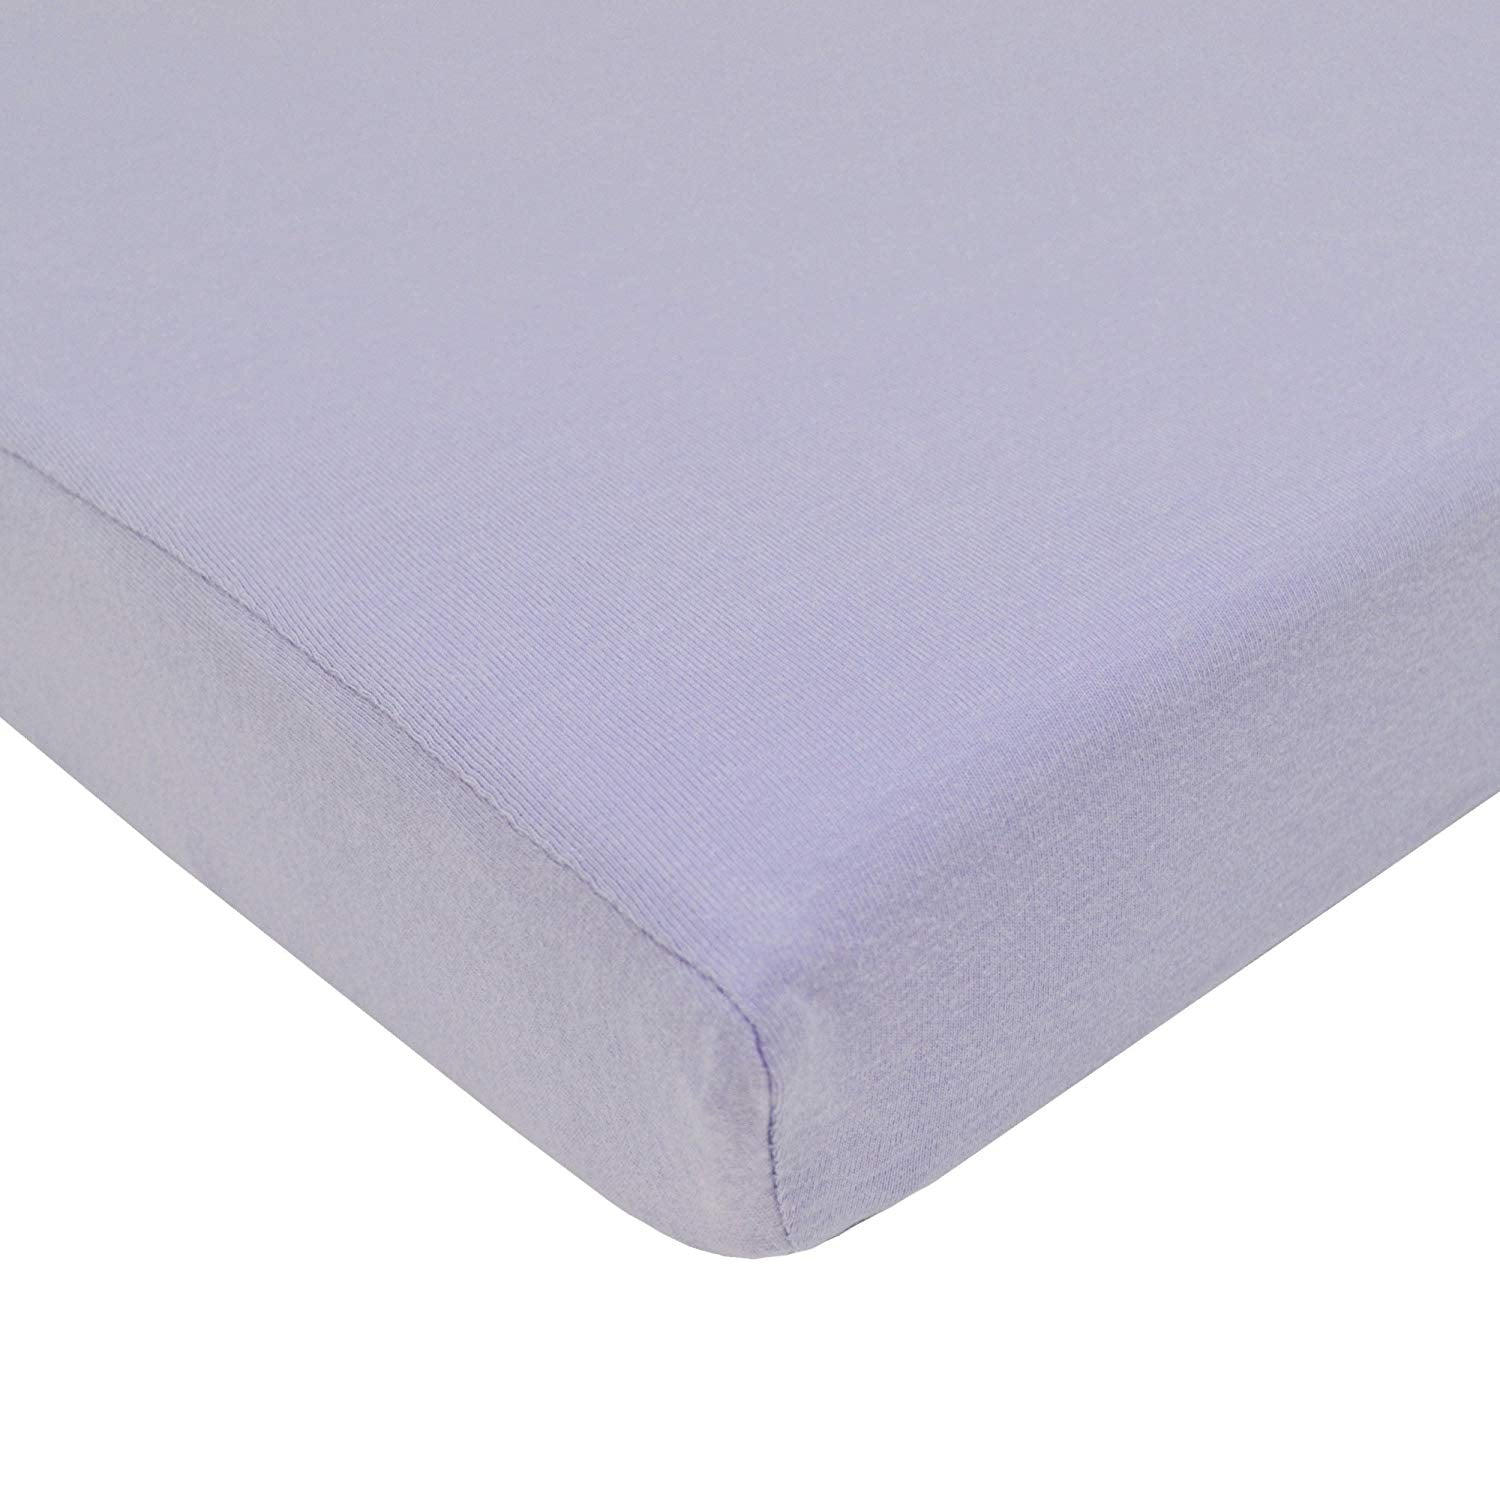 Ecru TL Care Supreme 100% Natural Cotton Jersey Knit Fitted Cradle Sheet for Boys and Girls Soft Breathable